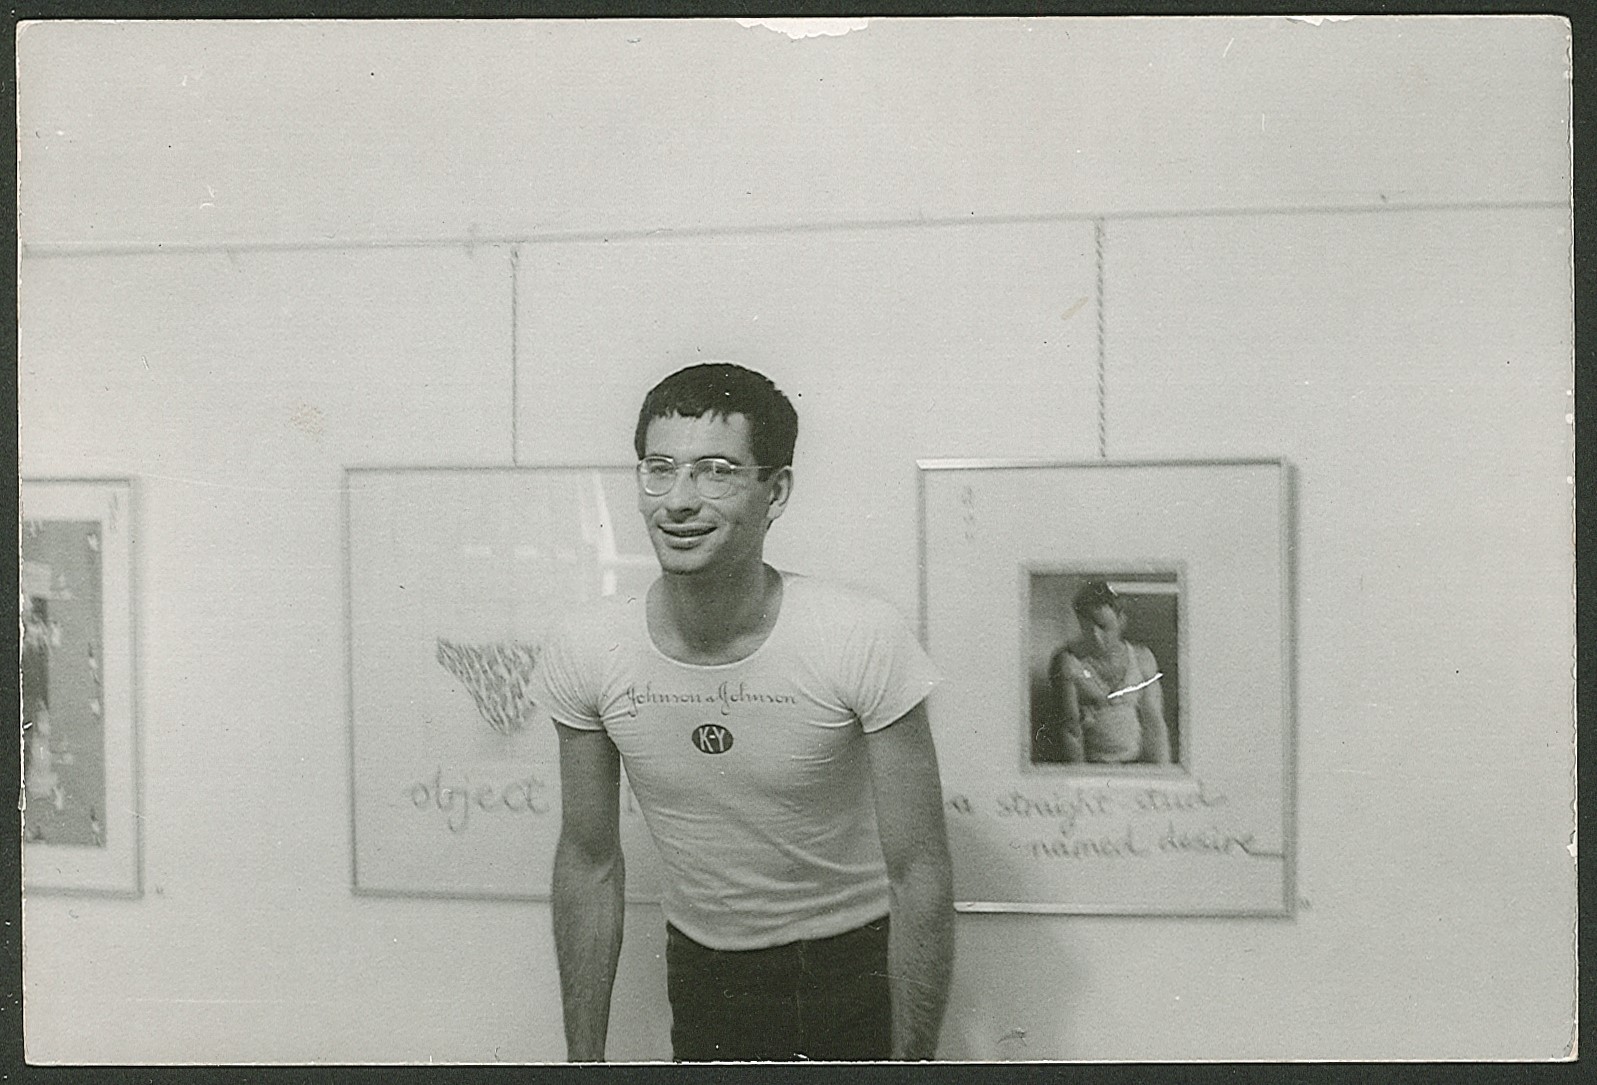 A black and white image of a white man with short dark hair and glasses, wearing a tight white t-shirt, standing in a gallery